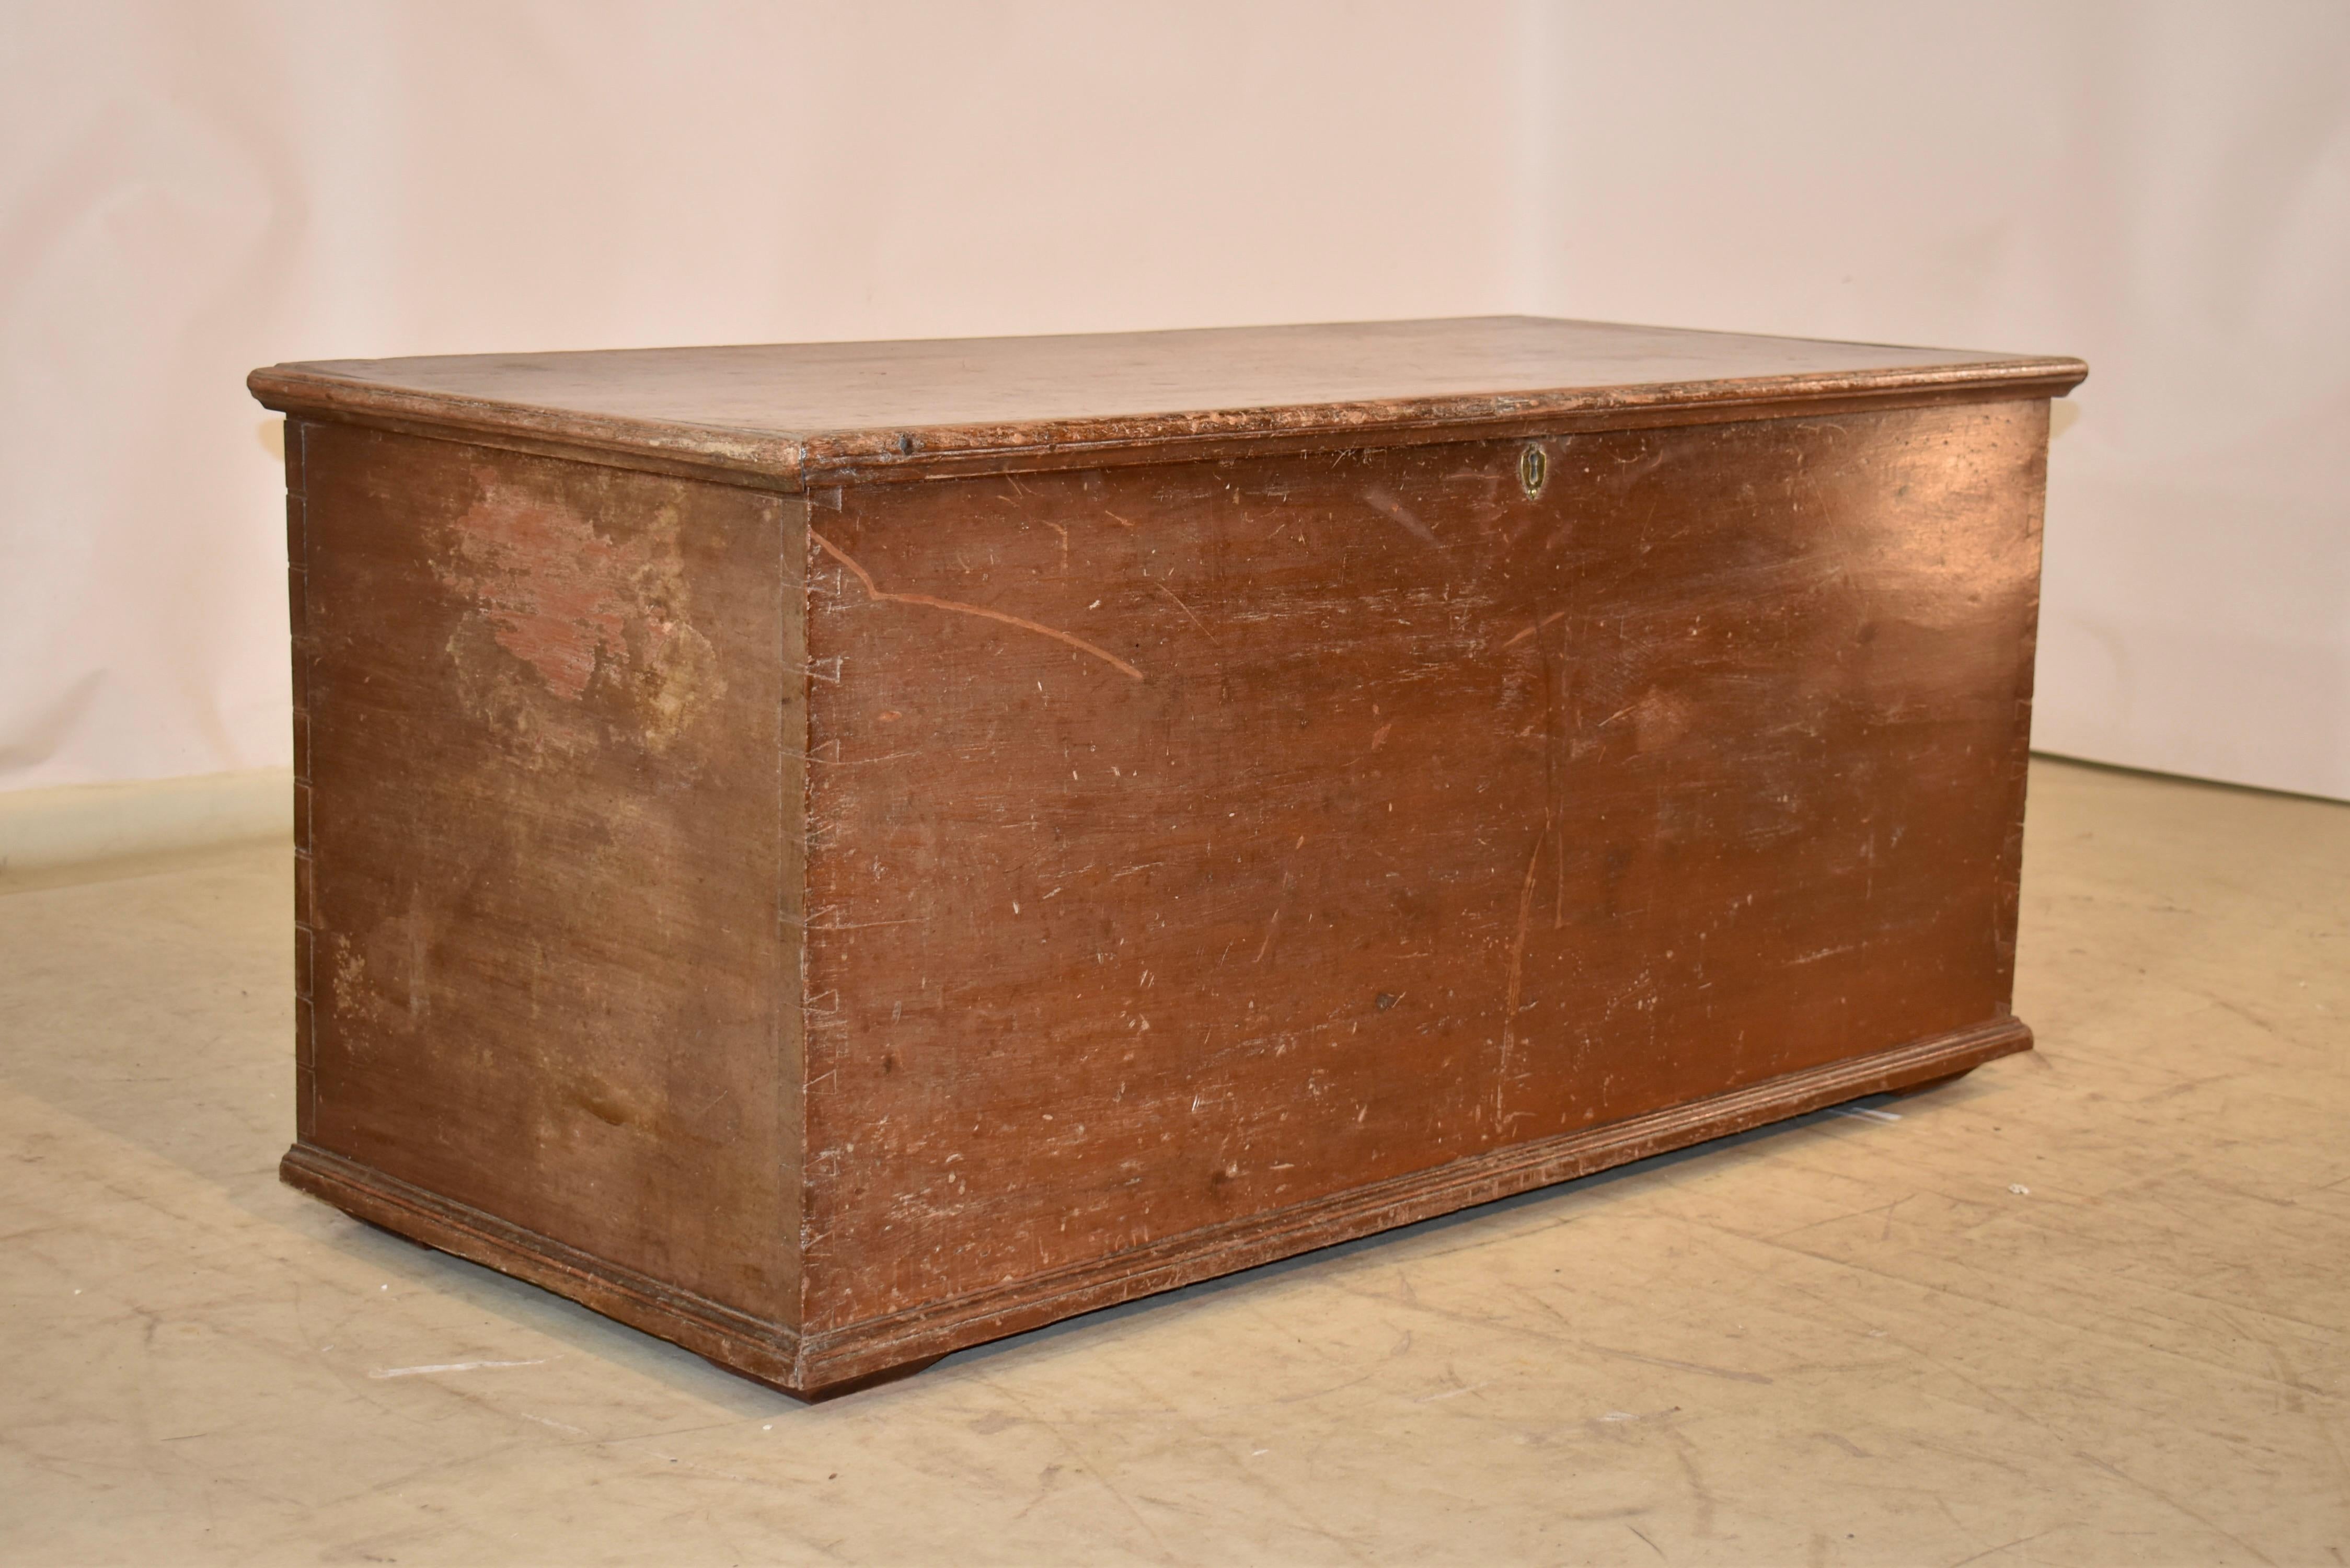 Early 19th century American pine blanket chest made from six boards.  The color is a brick reddish brown and is original to the piece.  The hinges appear to be original to the piece and when open, reveals a candle box.  This is a wonderful and